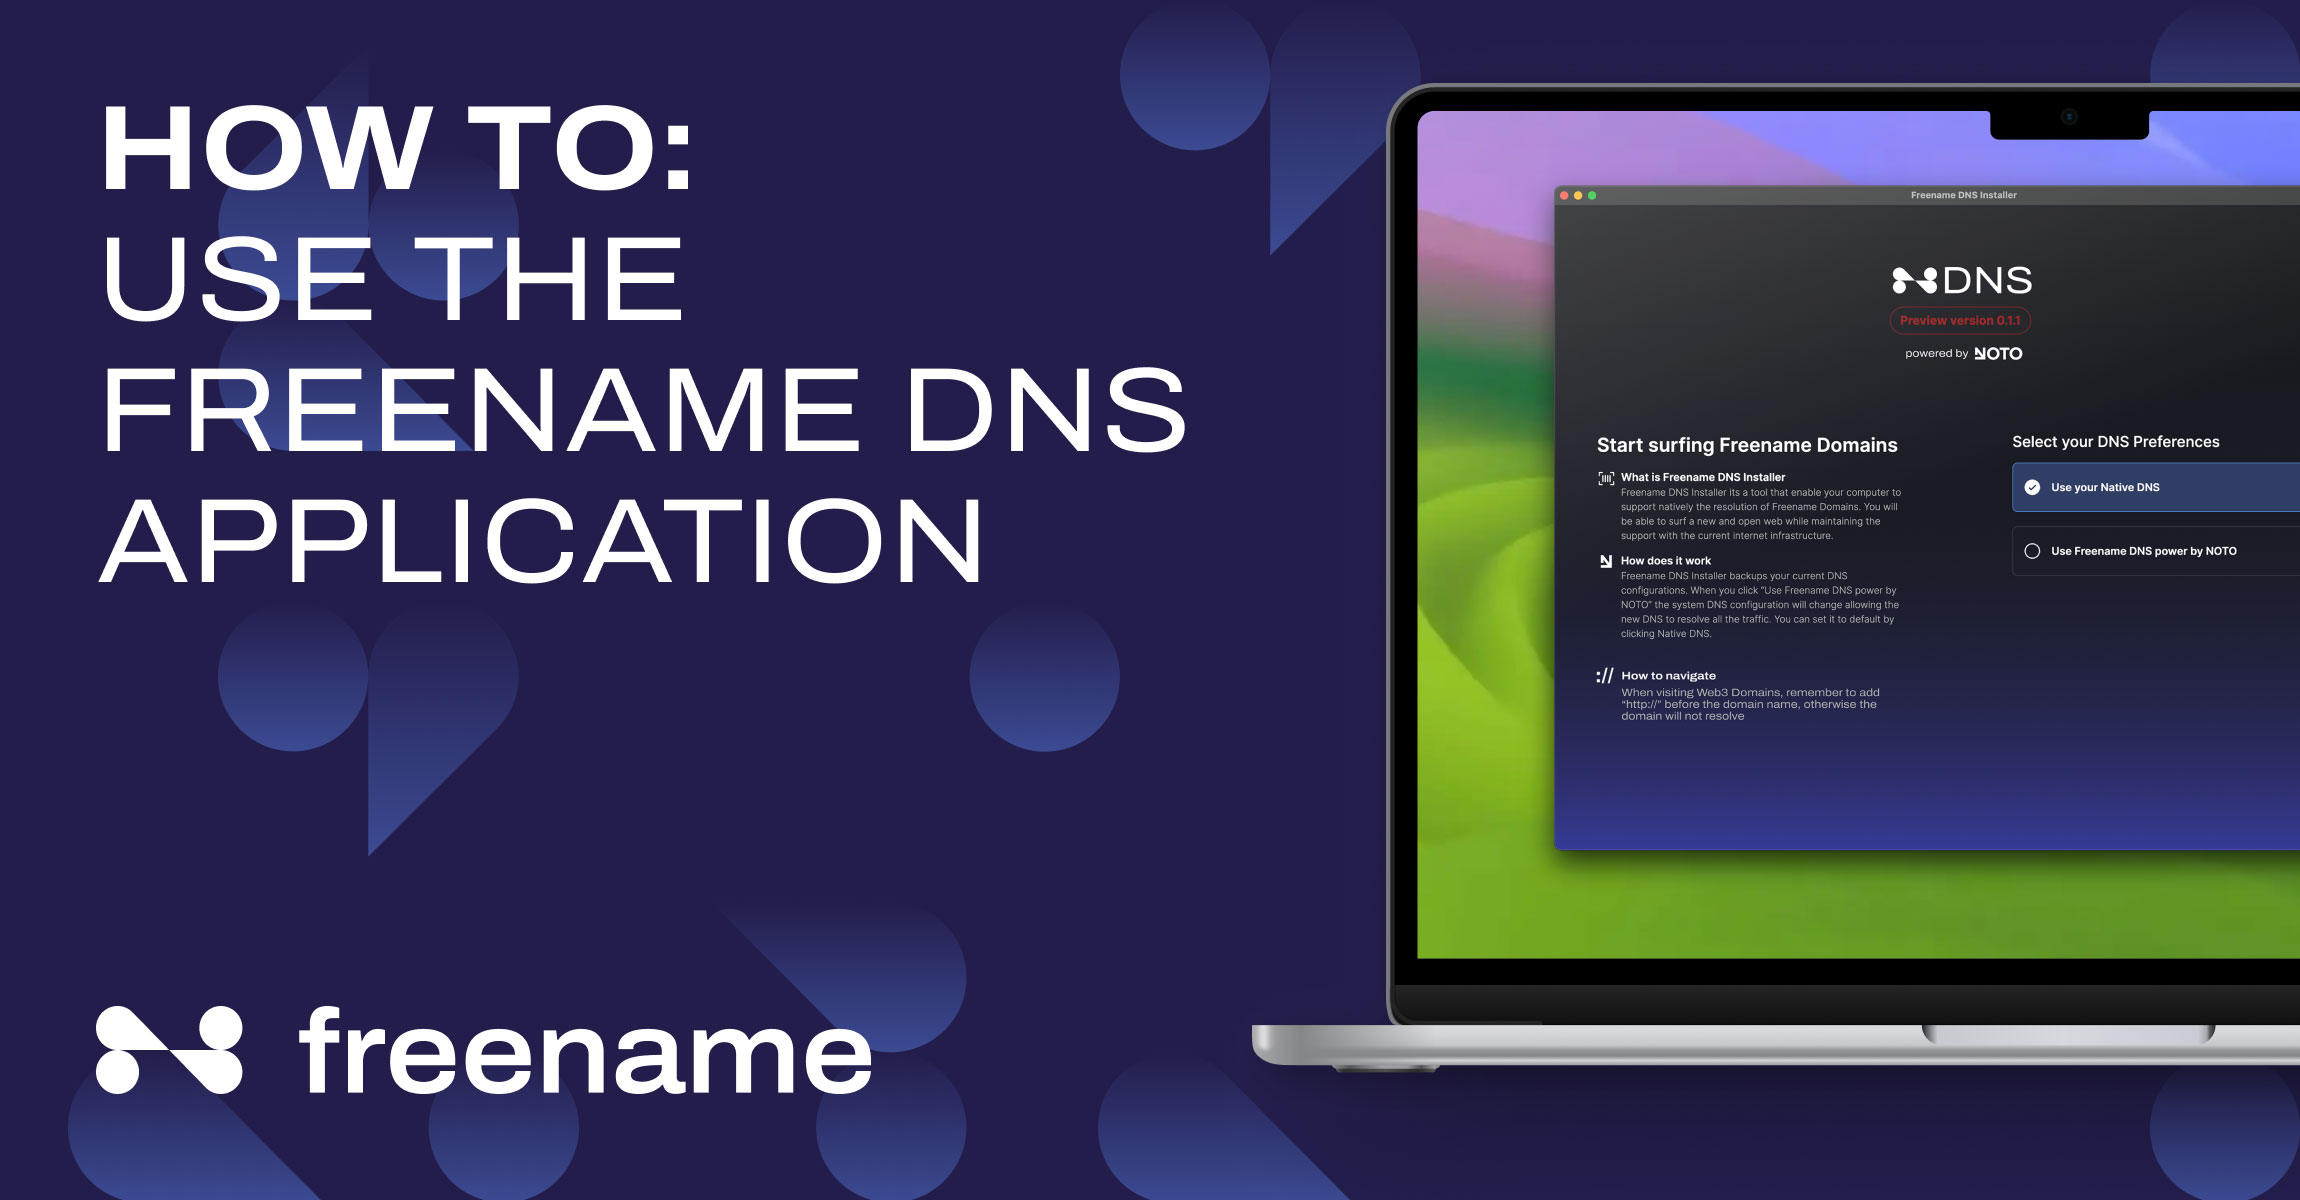 How To: Use the Freename DNS Application